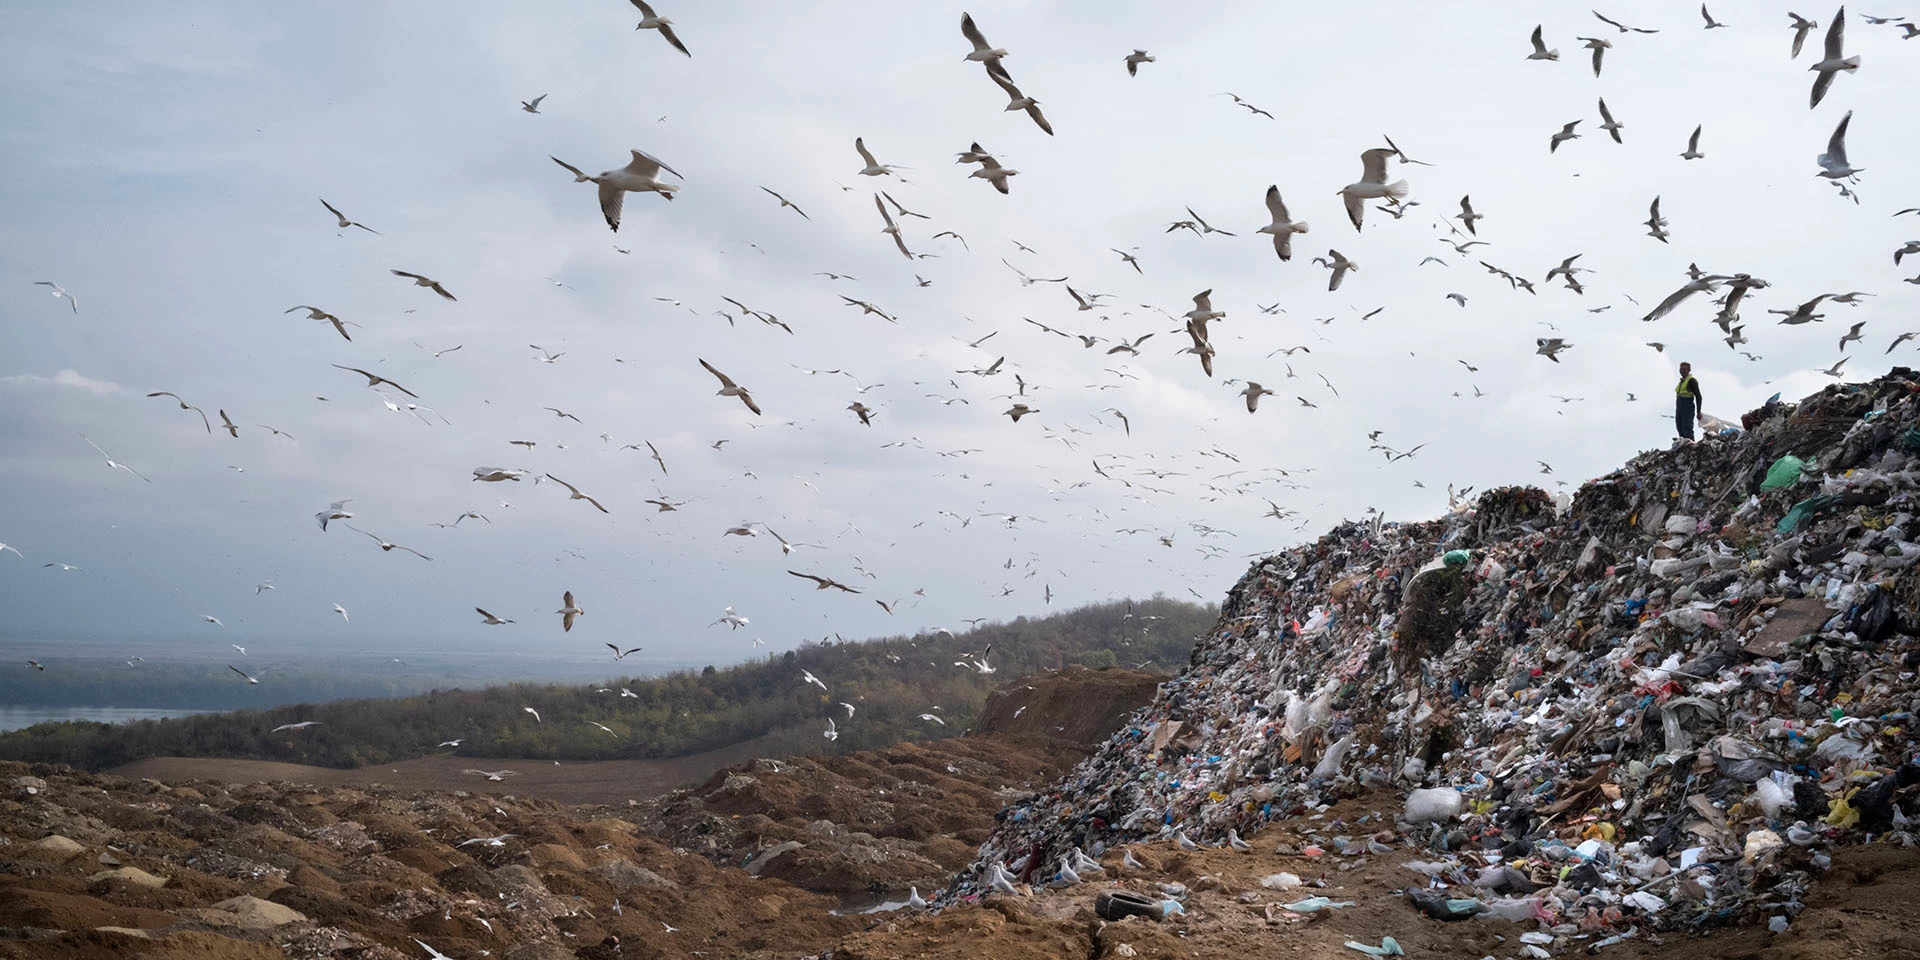 On October 31, 2019, a waste picker looks toward the Danube River while working at the Vinča Landfill in Belgrade, Serbia. The landfill’s trash is rolling toward the Danube, and is leeching toxic water into the water supply. Photo © Dominic Chavez/International Finance Corporation
